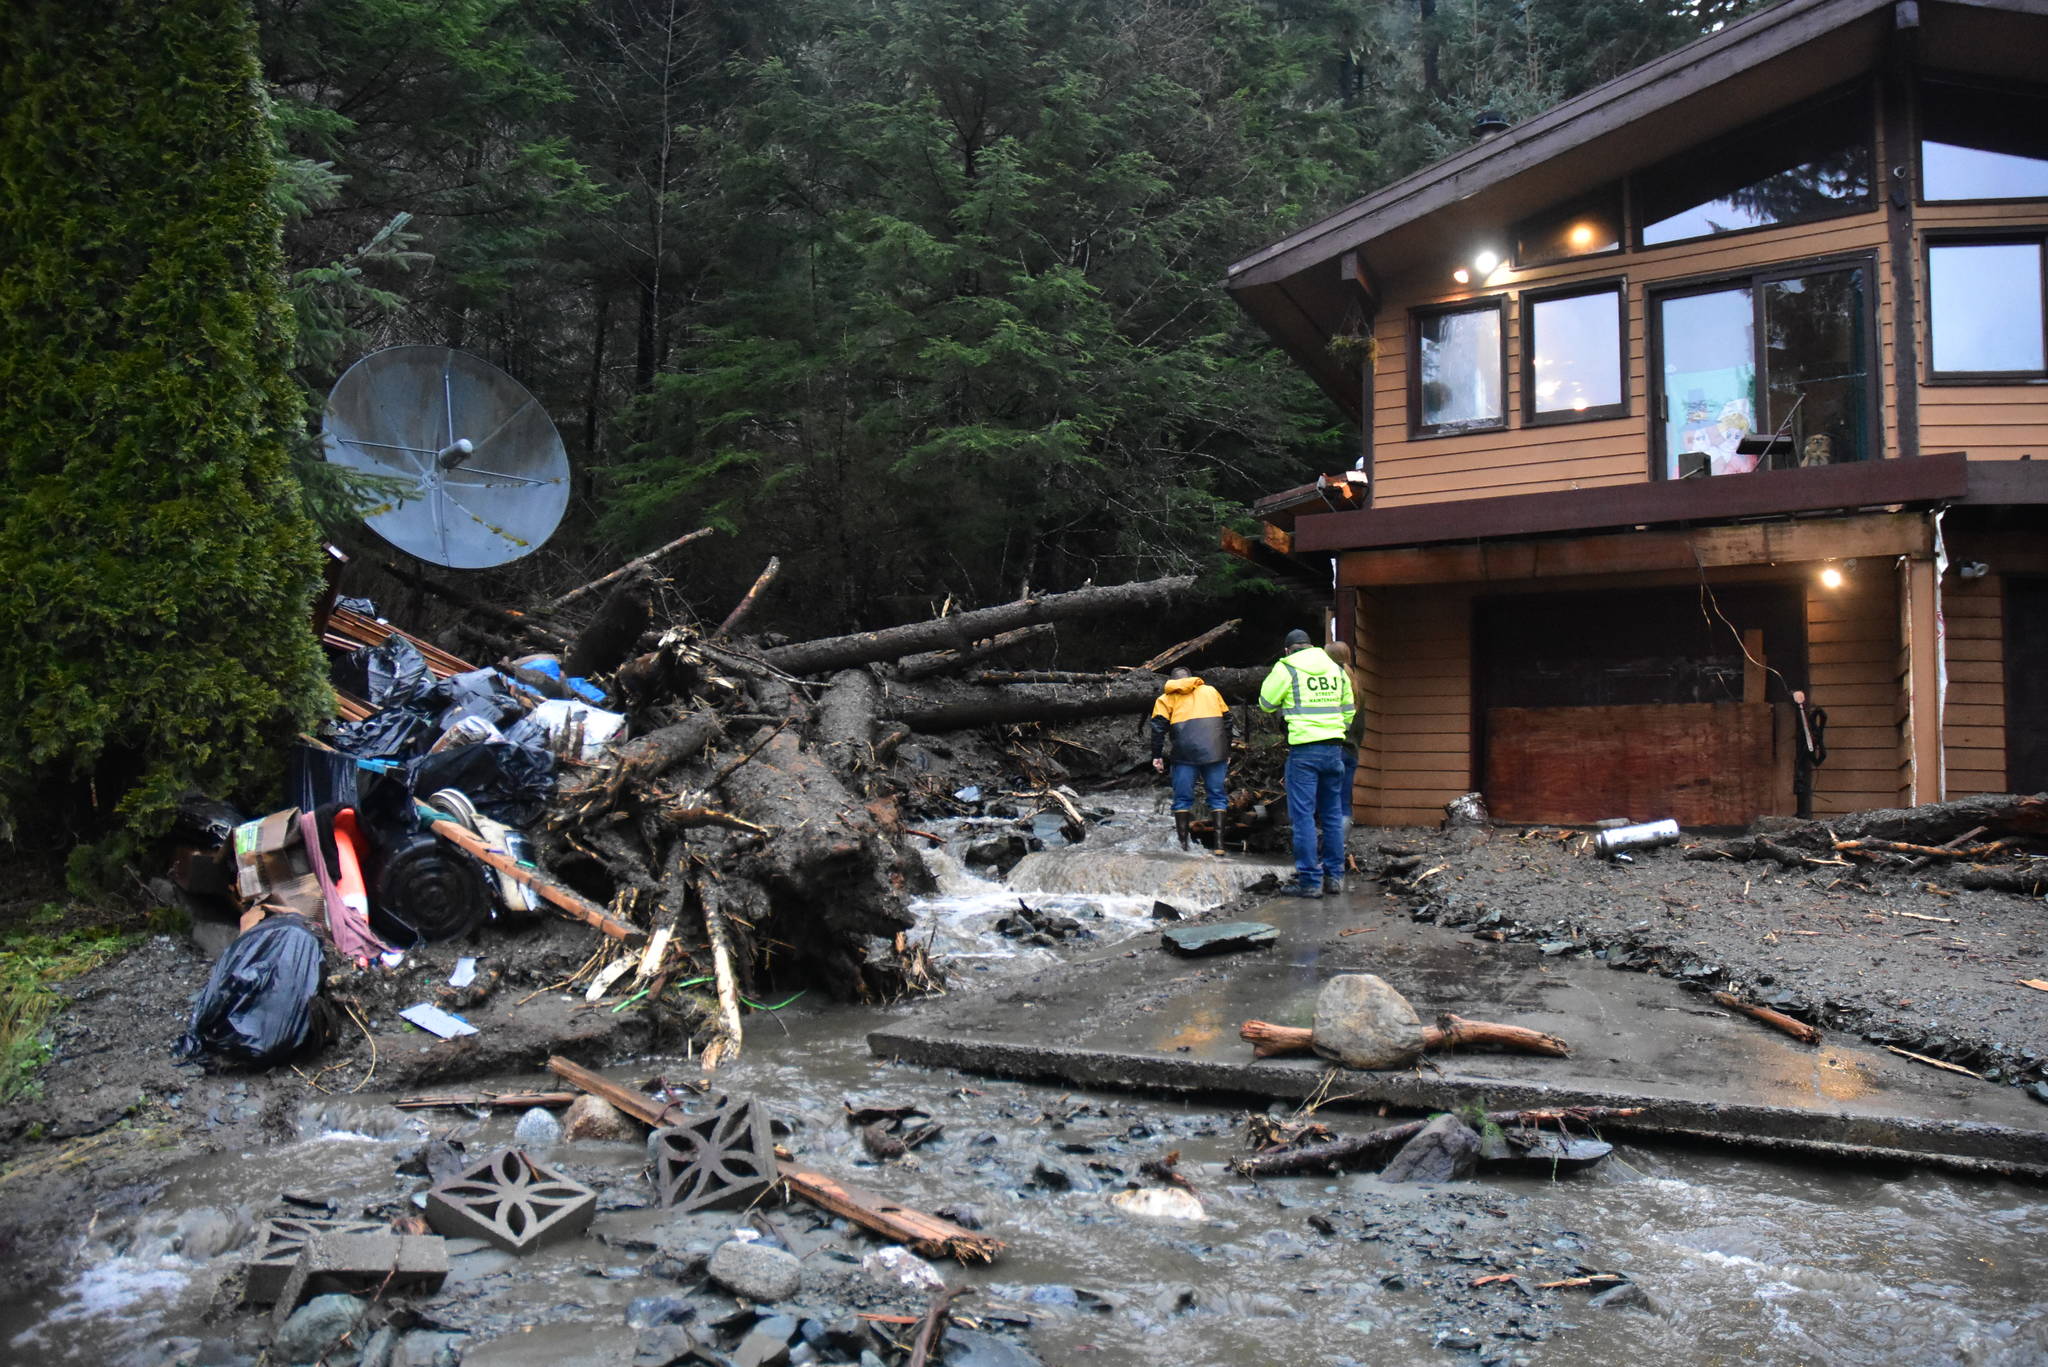 A mudslide at the top of Wire Street near Twin Lakes Wednesday, Dec. 2, 2020, sent rocks and other debris down the road. City and Borough of Juneau staff were on-site to assess the damage. (Peter Segall / Juneau Empire)